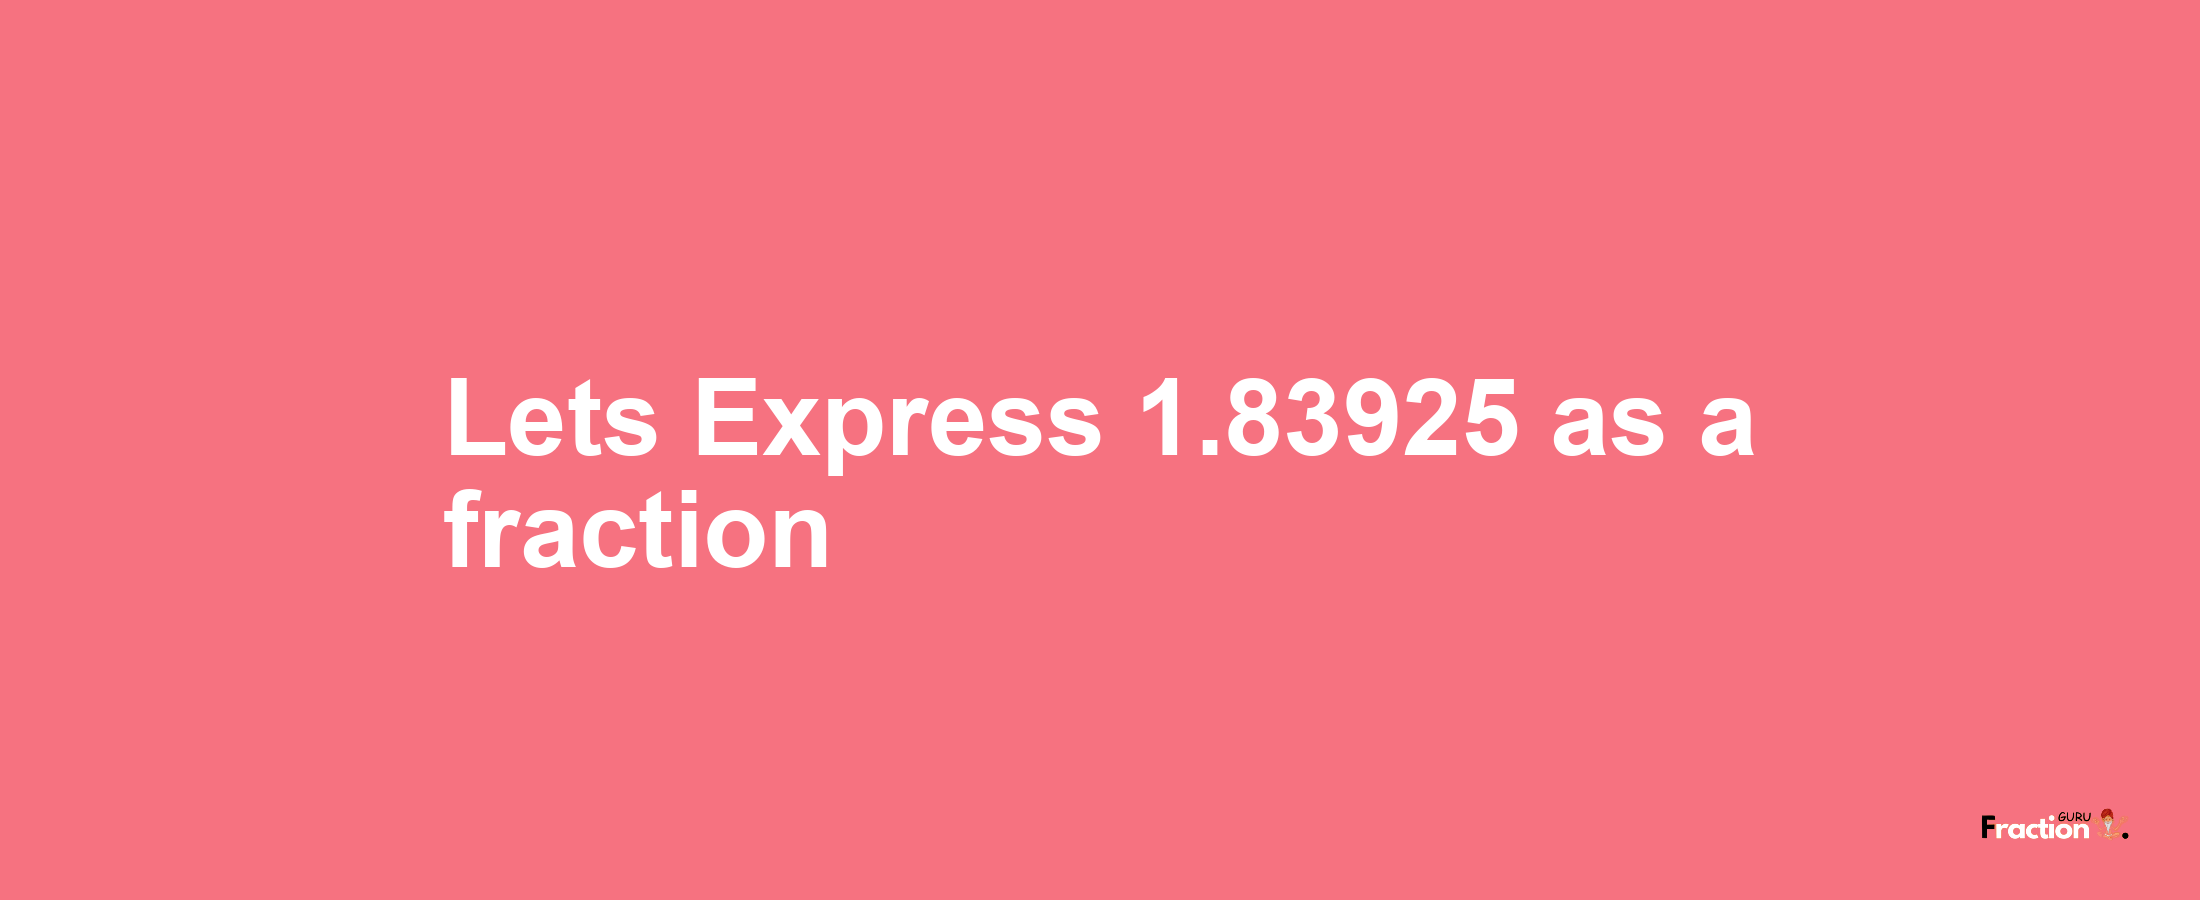 Lets Express 1.83925 as afraction